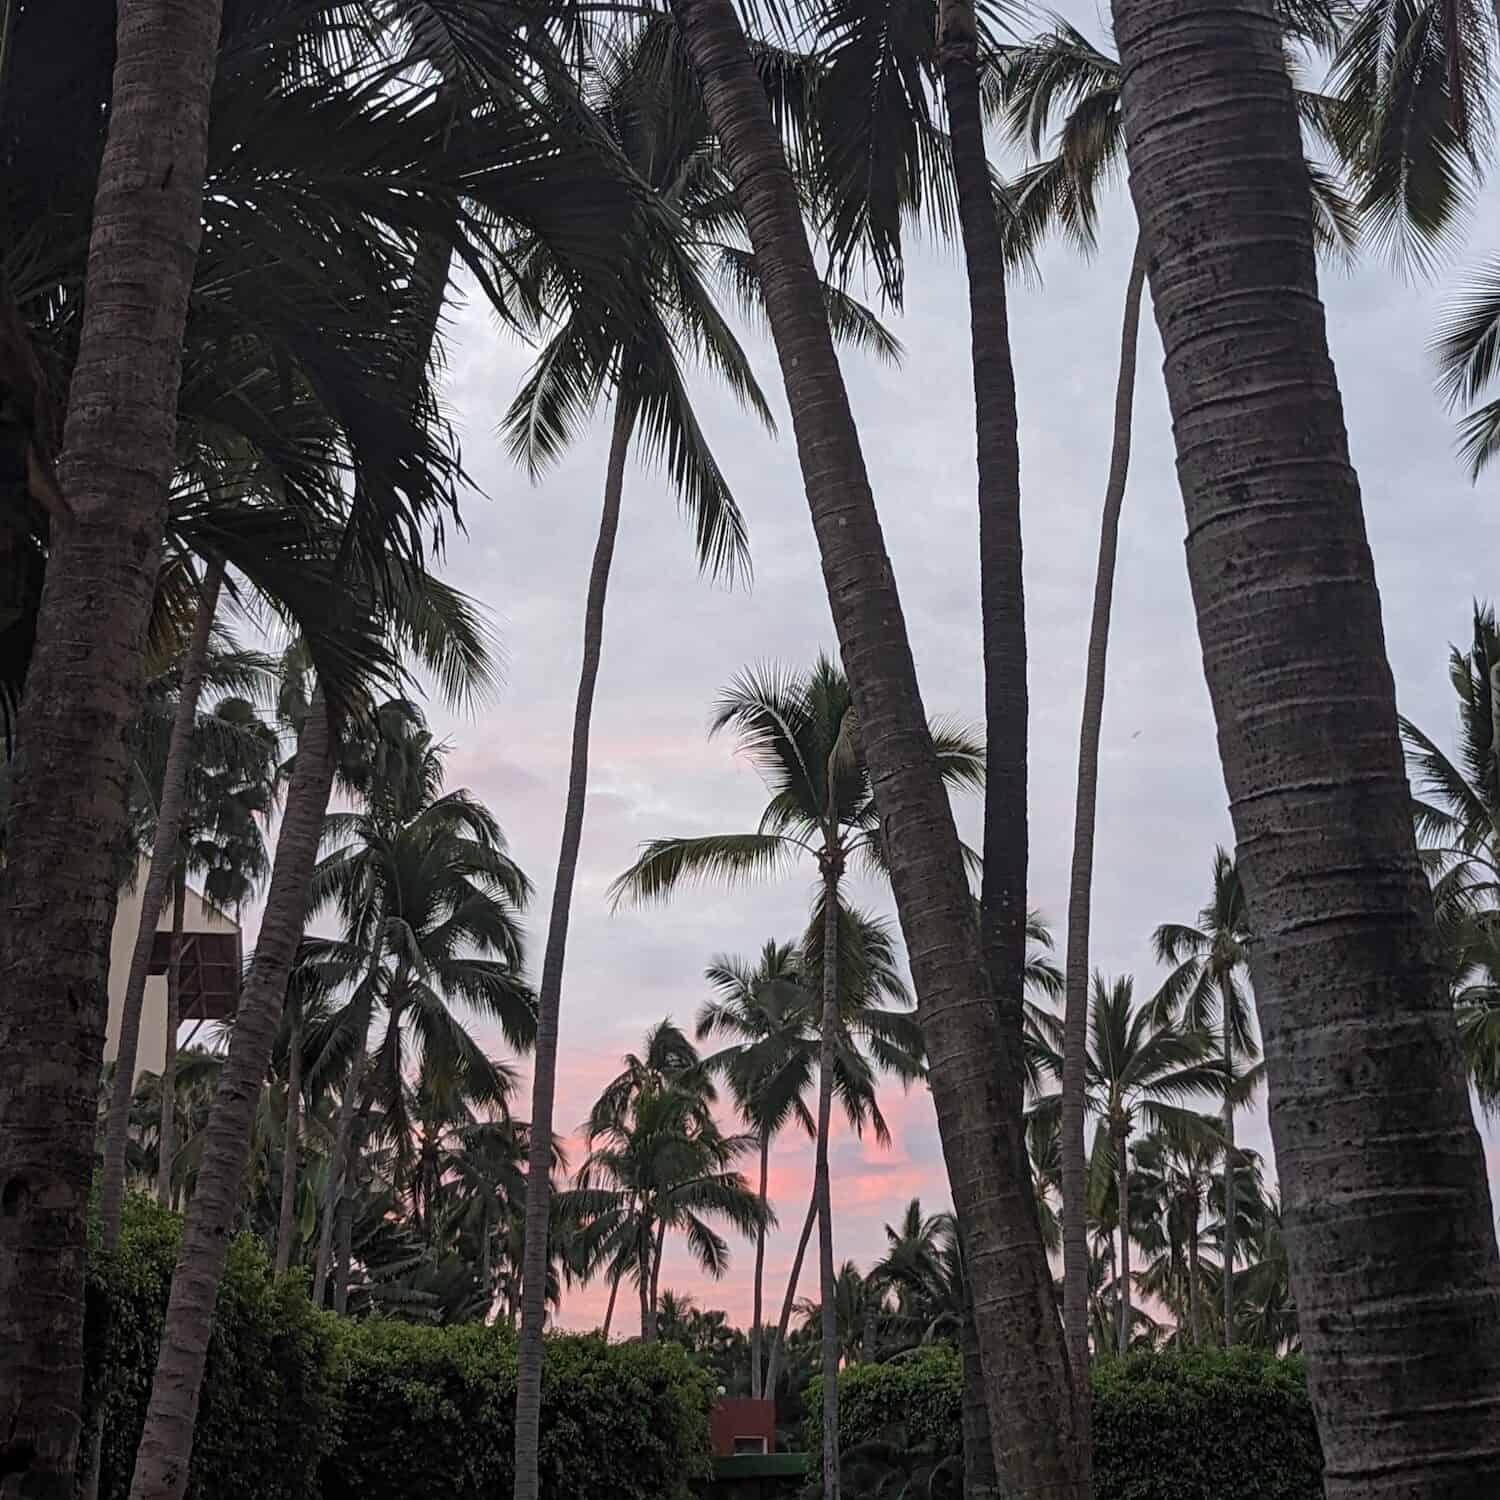 Palm trees and sky with pink sky at sunrise